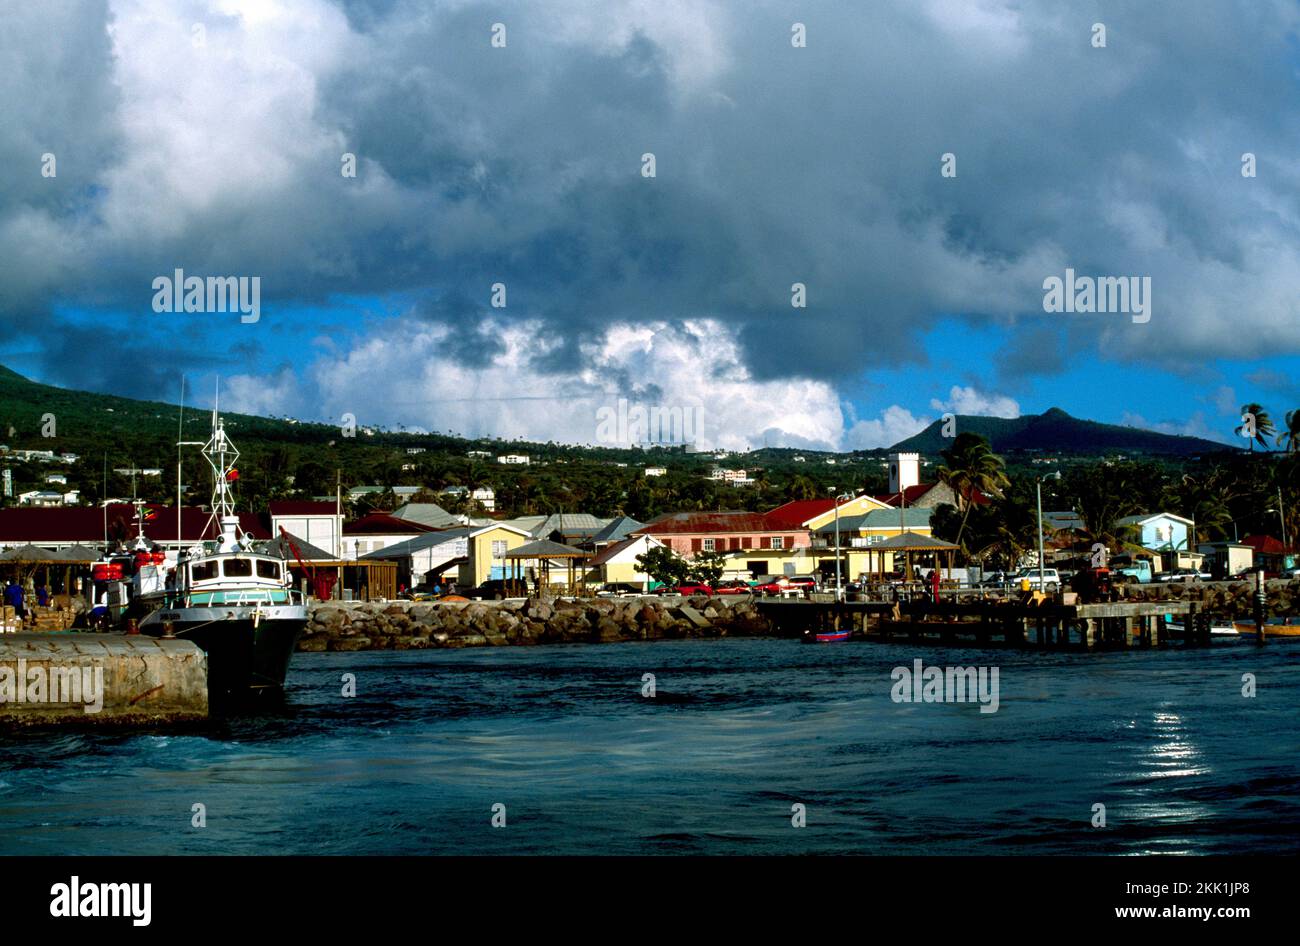 Charlestown Nevis Harbour from the Sea Stock Photo